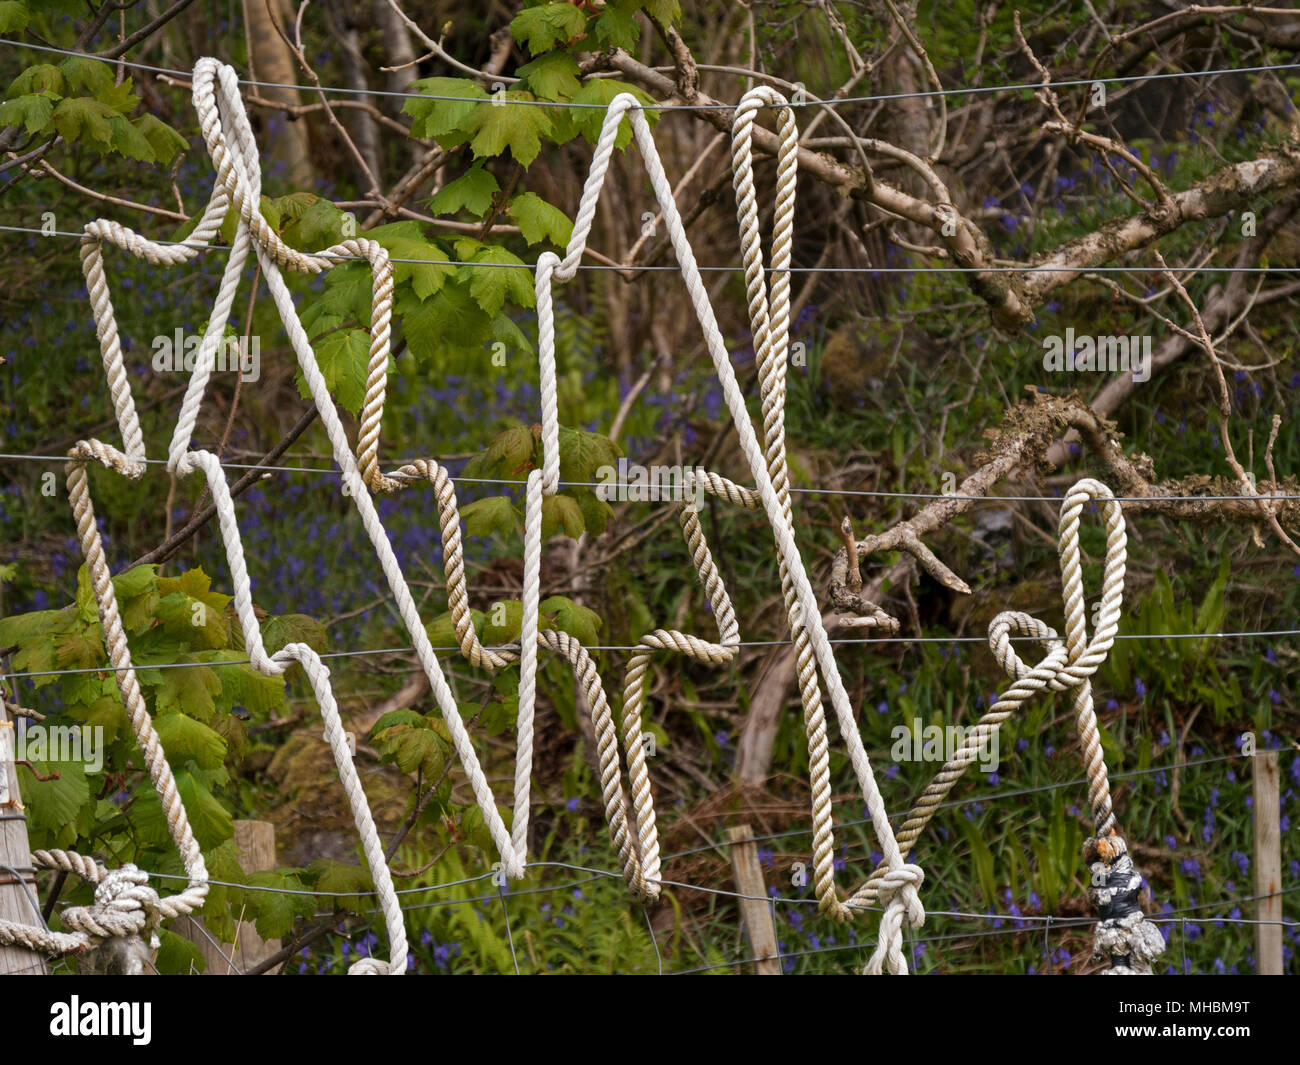 Old discarded white nylon rope wrapped around wire fence to create random artistic pattern Stock Photo